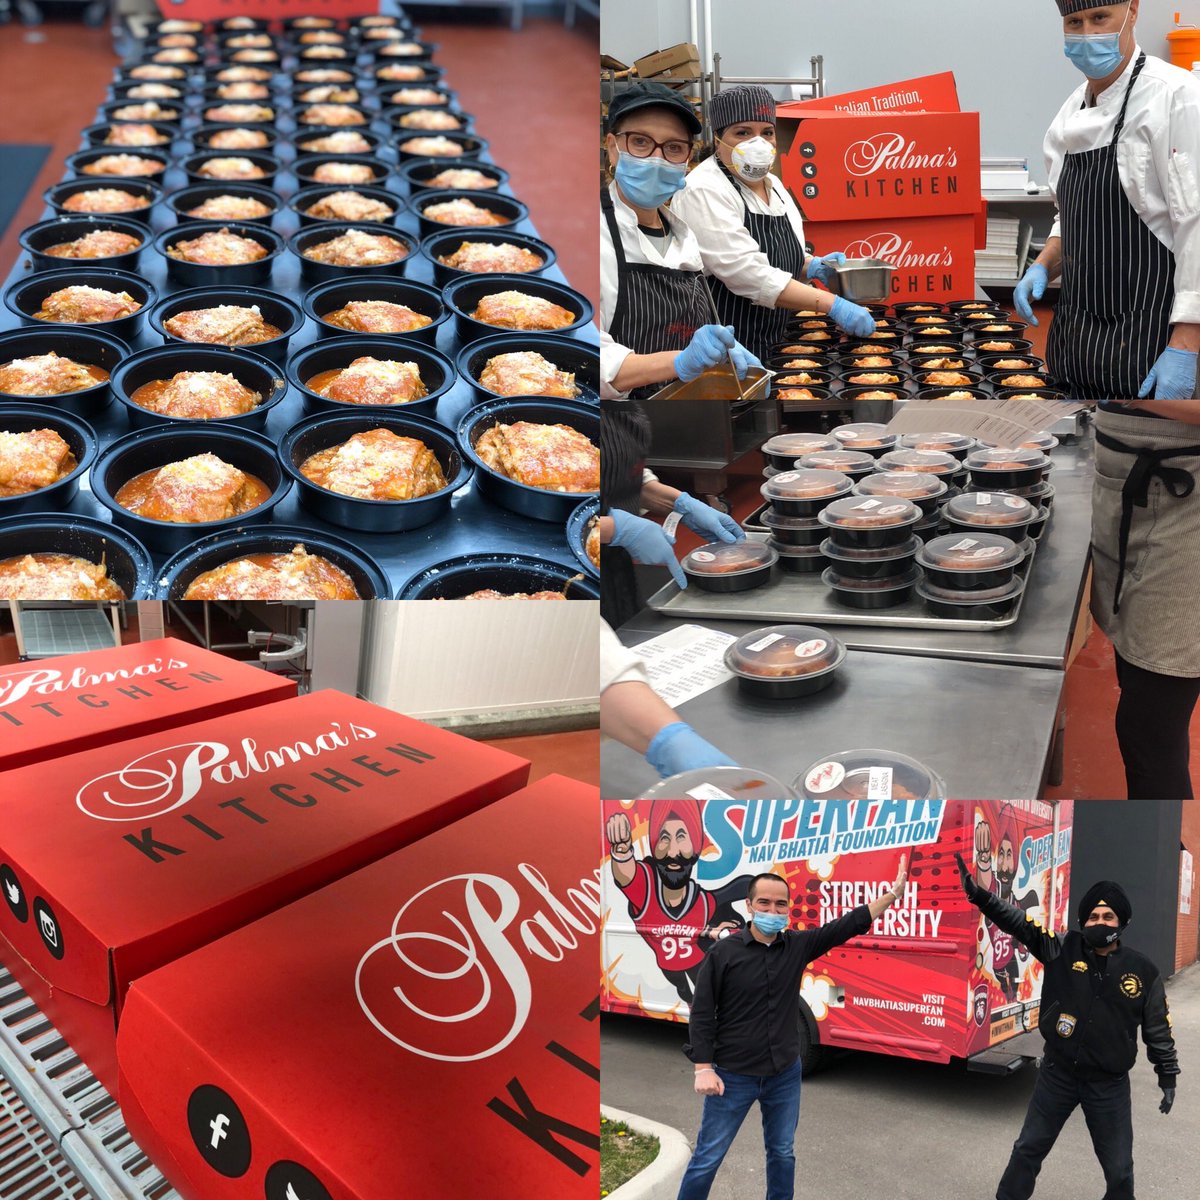 @PalmaPasta was honoured to be a part of @superfan_nav and @sangita_patel initiative on giving back to the community 

250 pasta lunches for our front line workers #mealsonthemove #Mississauga #FrontLineHeroes